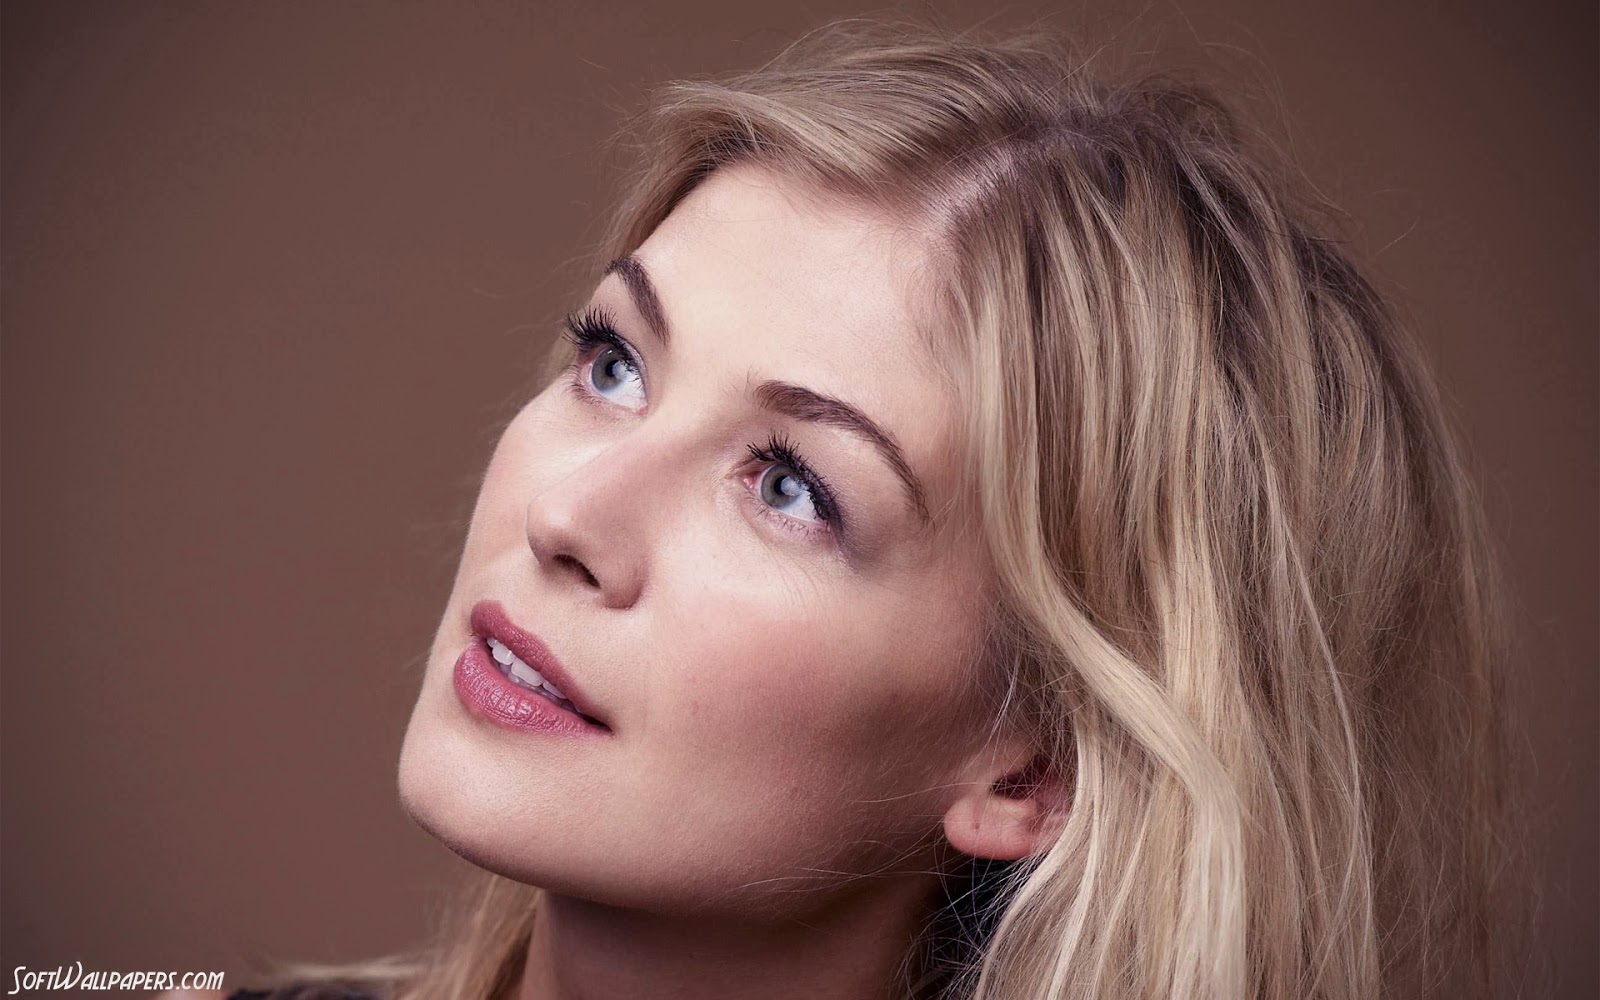 Free Rosamund Pike Hot and Sexy HD Wallpapers.